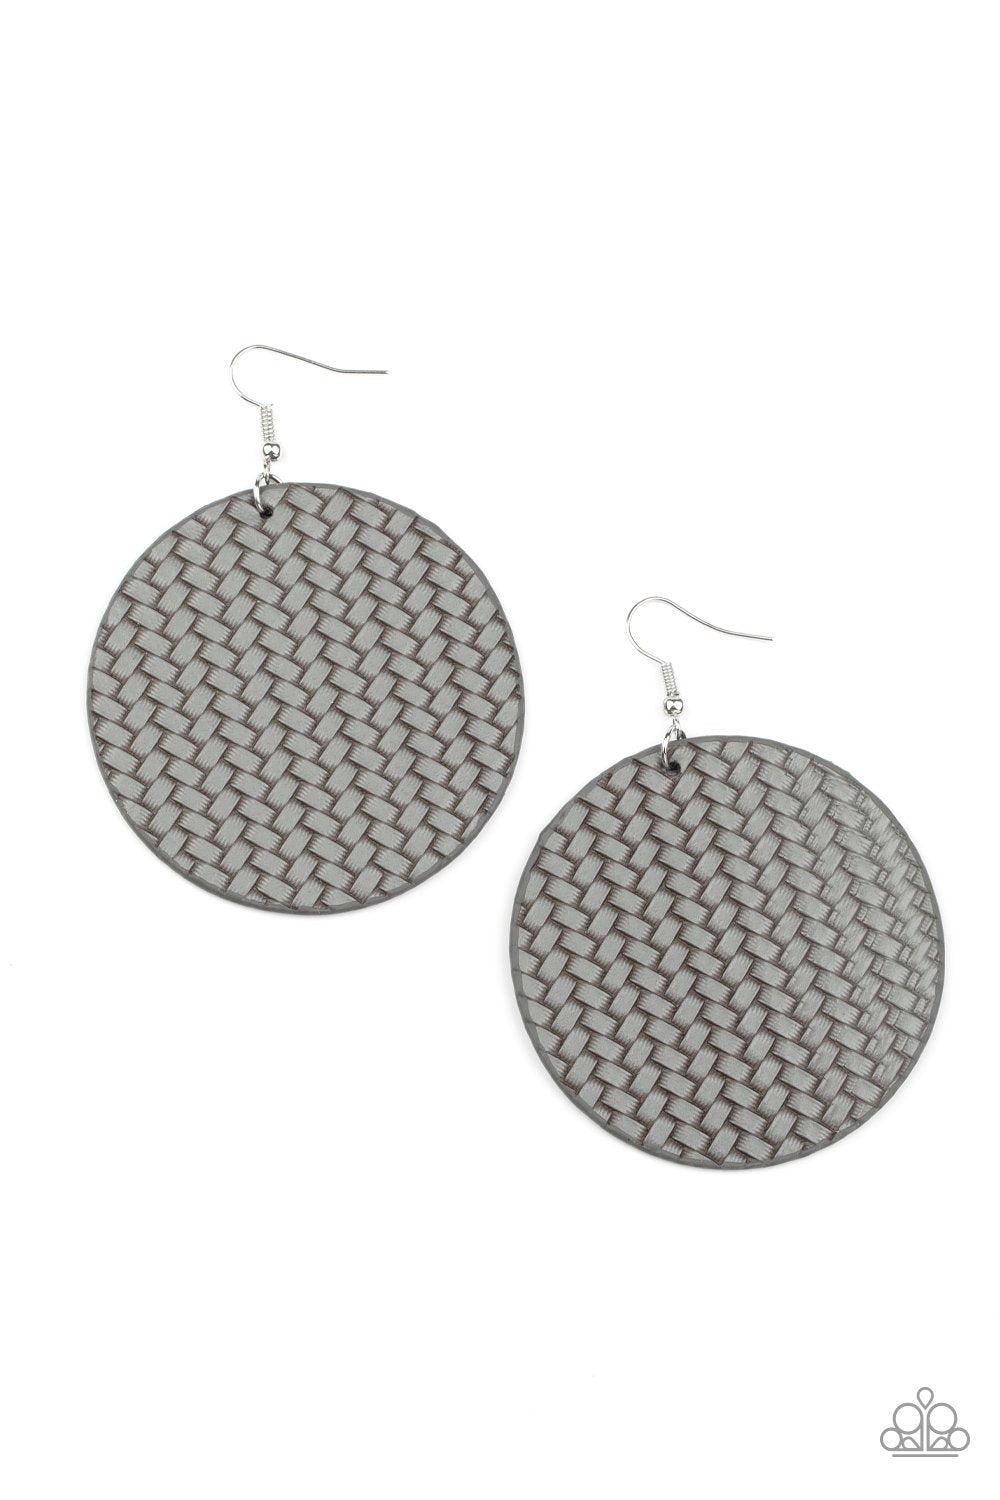 WEAVE Your Mark Silver Weave Earrings - Paparazzi Accessories-CarasShop.com - $5 Jewelry by Cara Jewels